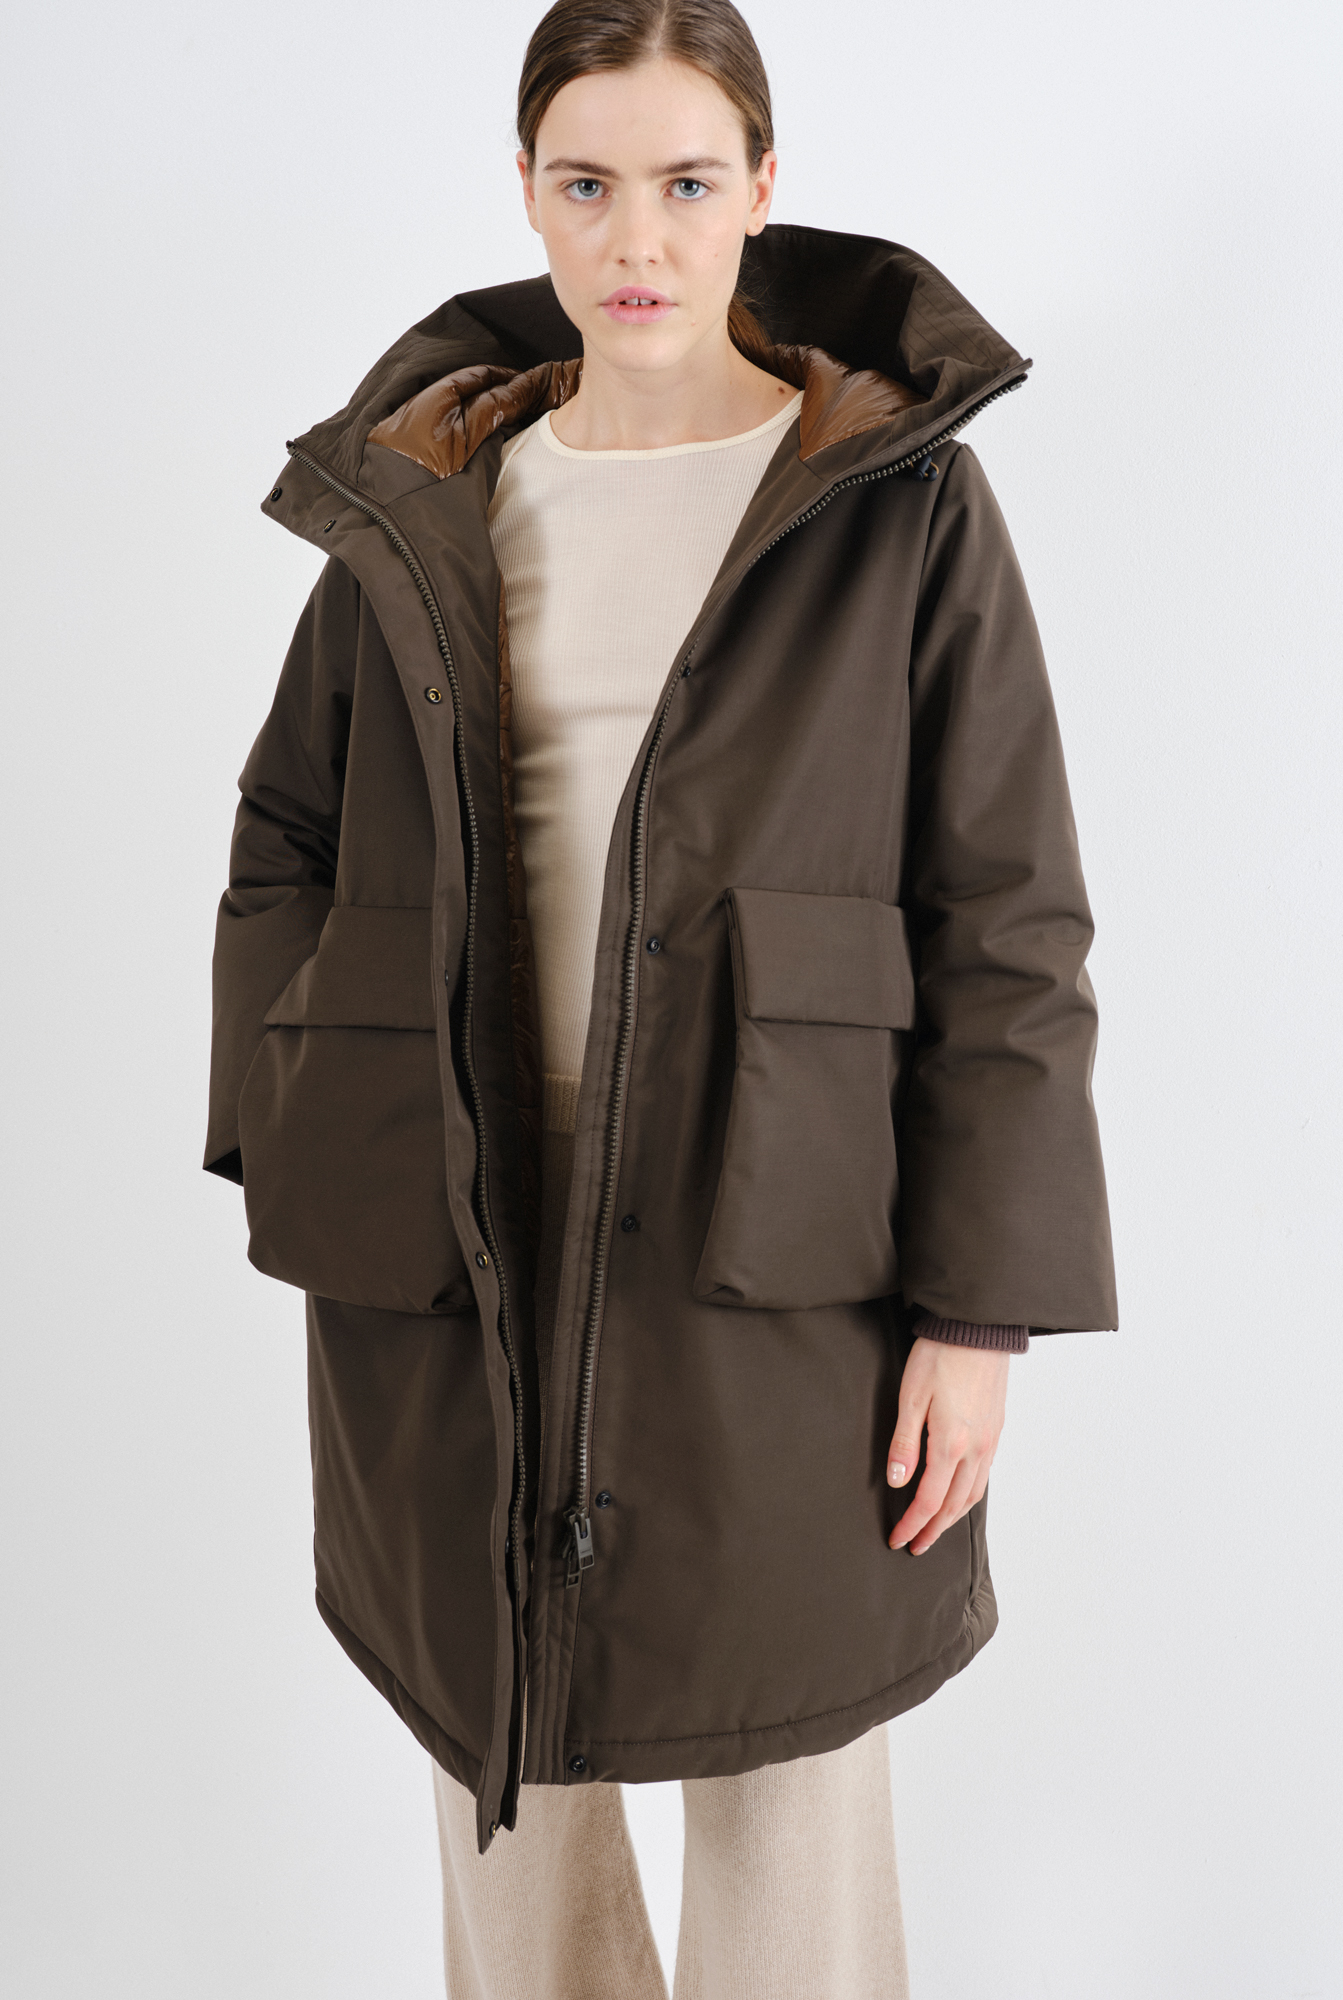 MOUNT PEARL UTILITY PARKA | Embassy of Bricks and Logs